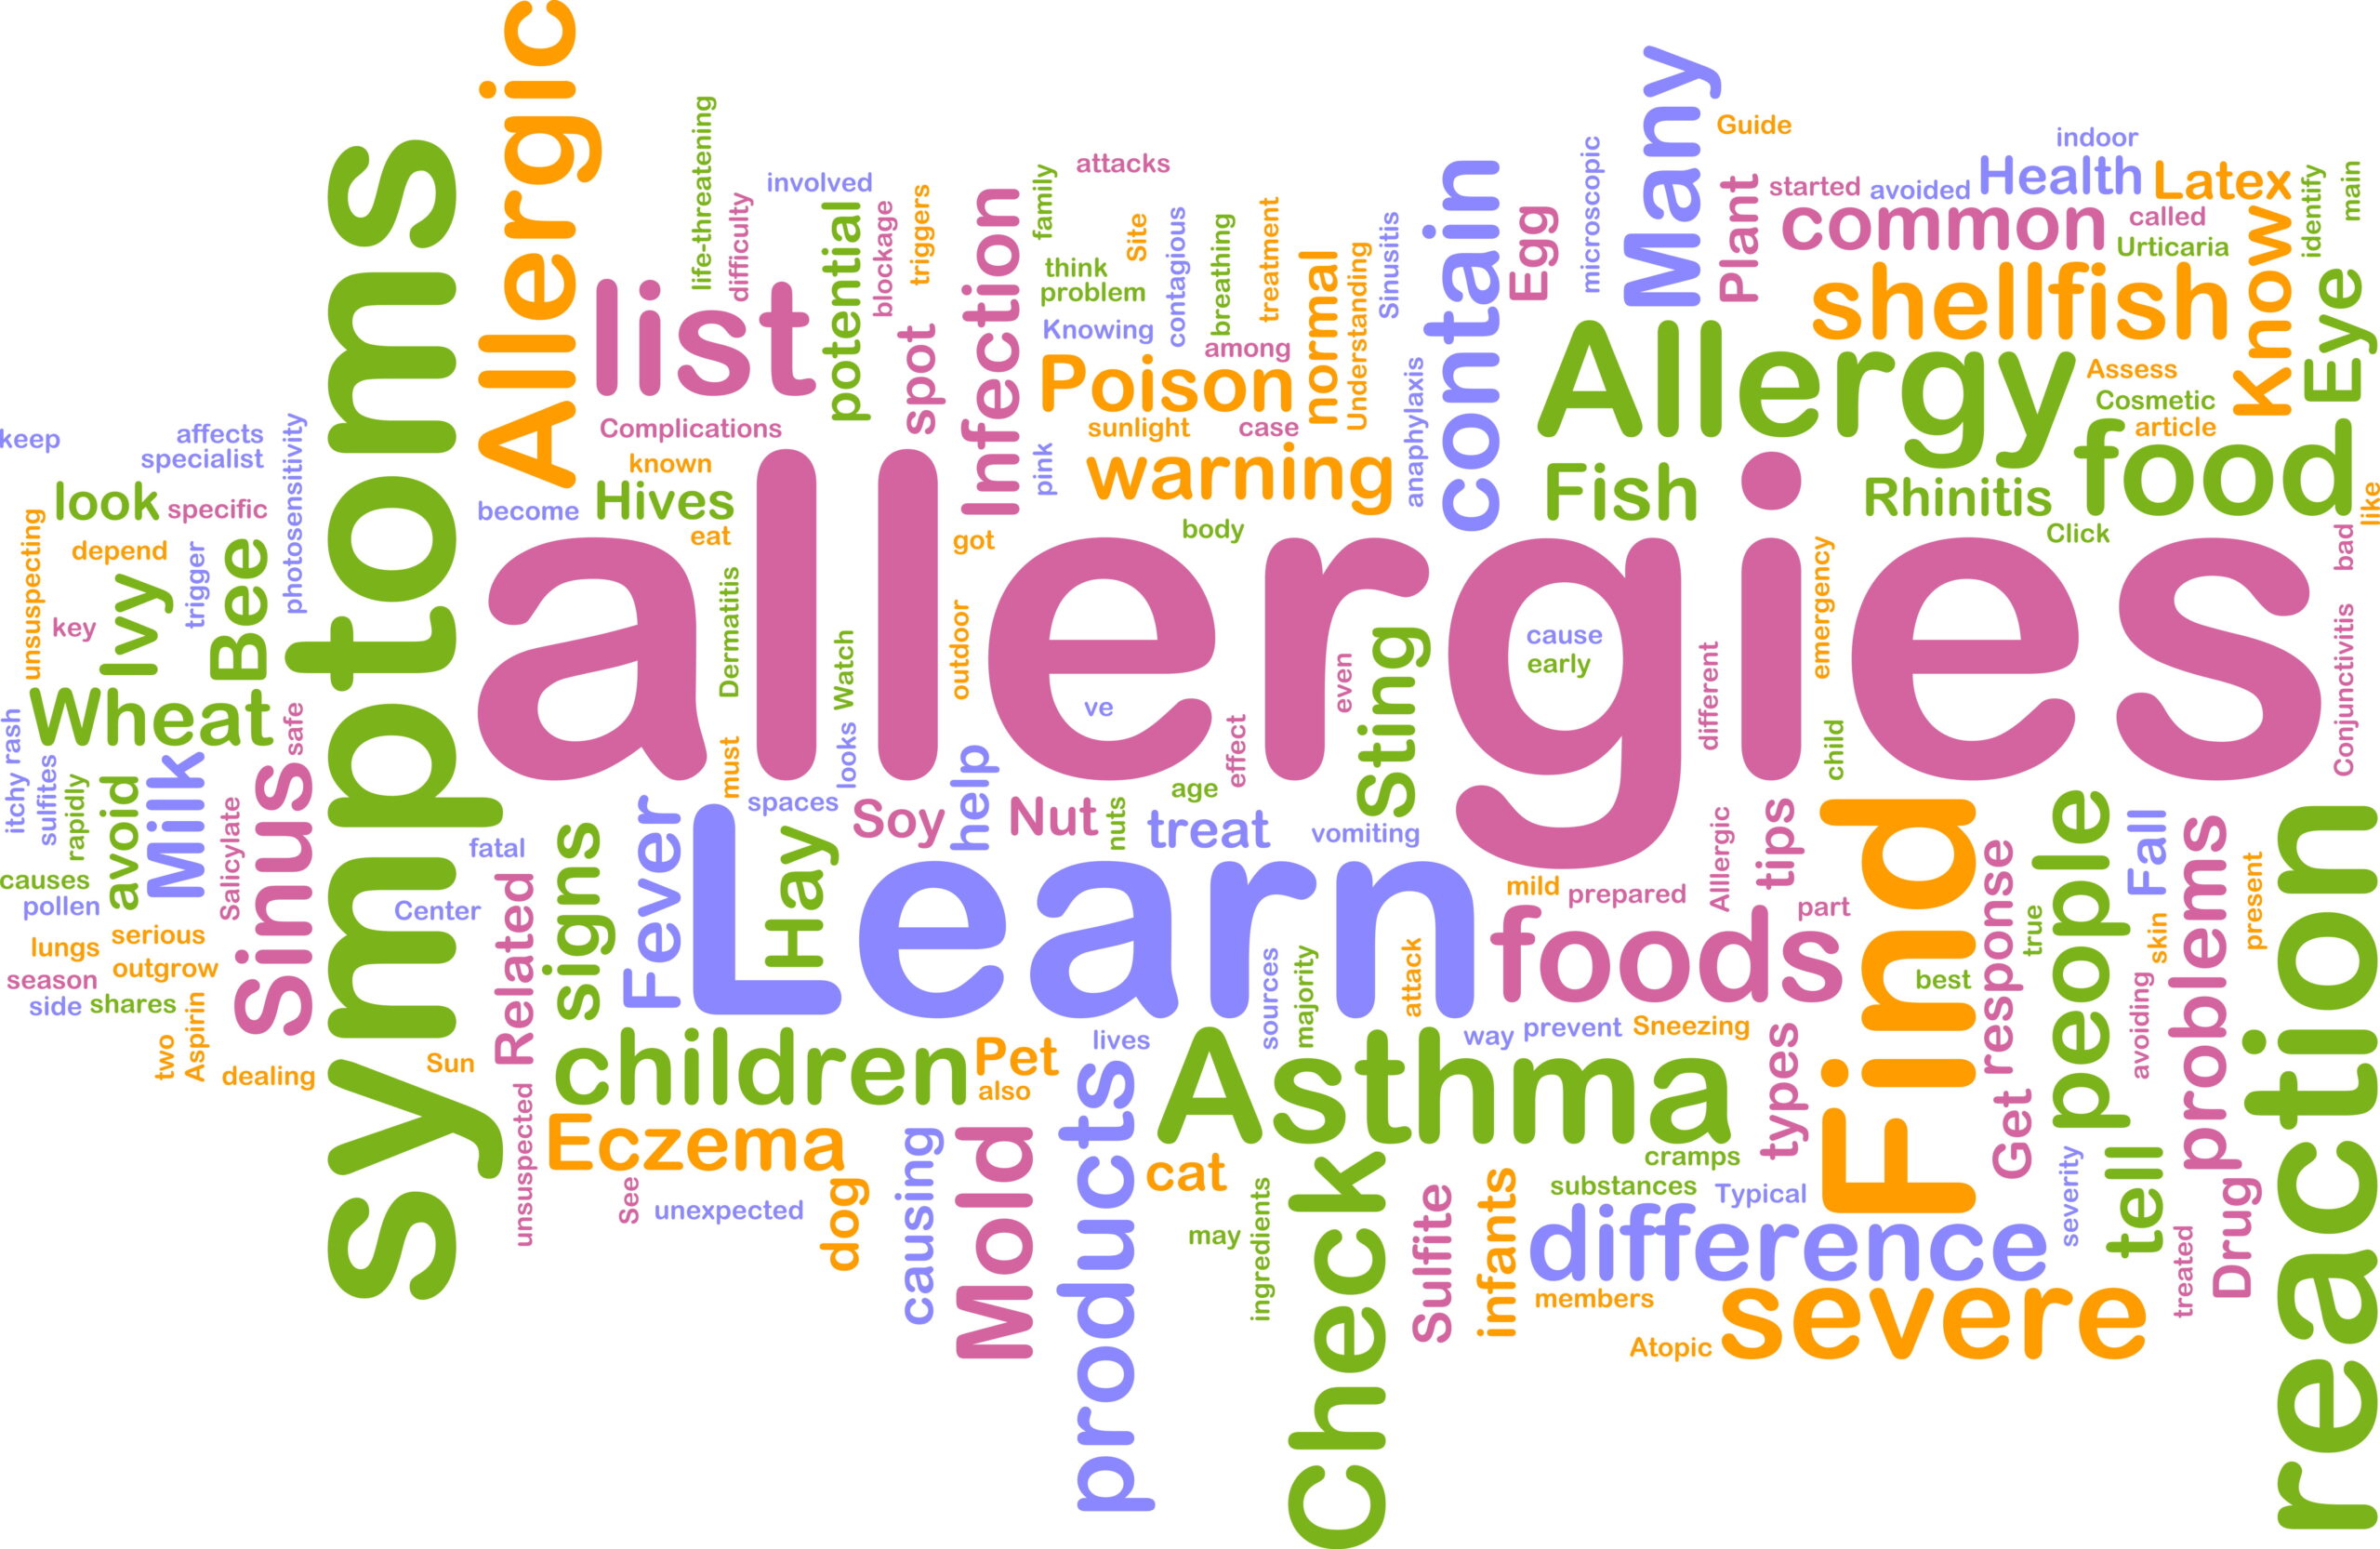 Food Allergy Linked to Genetics And Skin Exposure